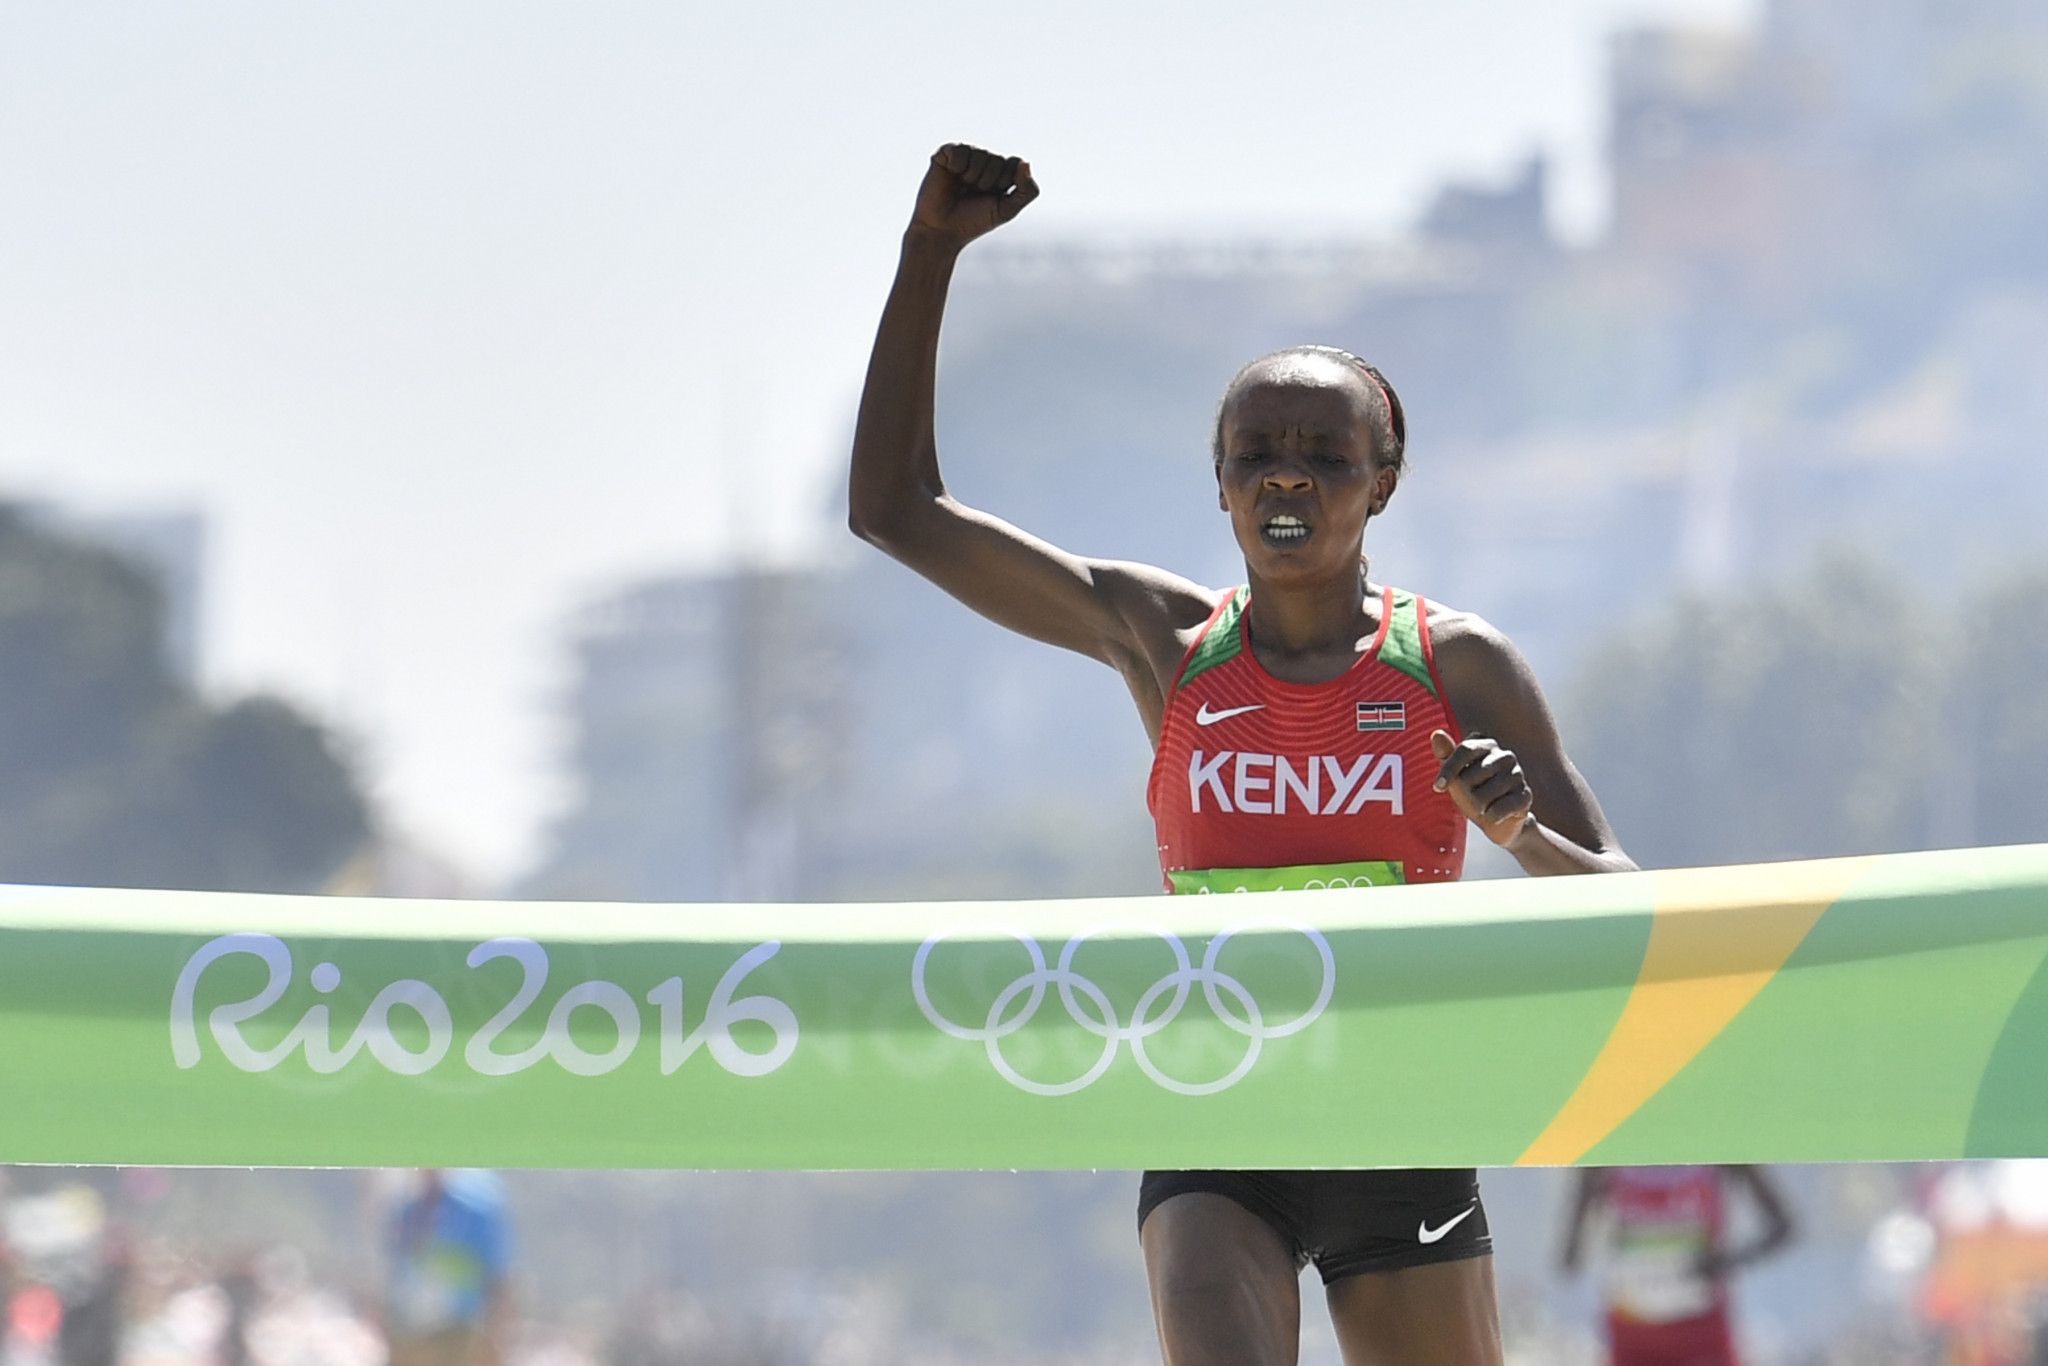 Olympic marathon champion Jemima Sumgong is among the top Kenyan runners currently banned for doping ©Getty Images